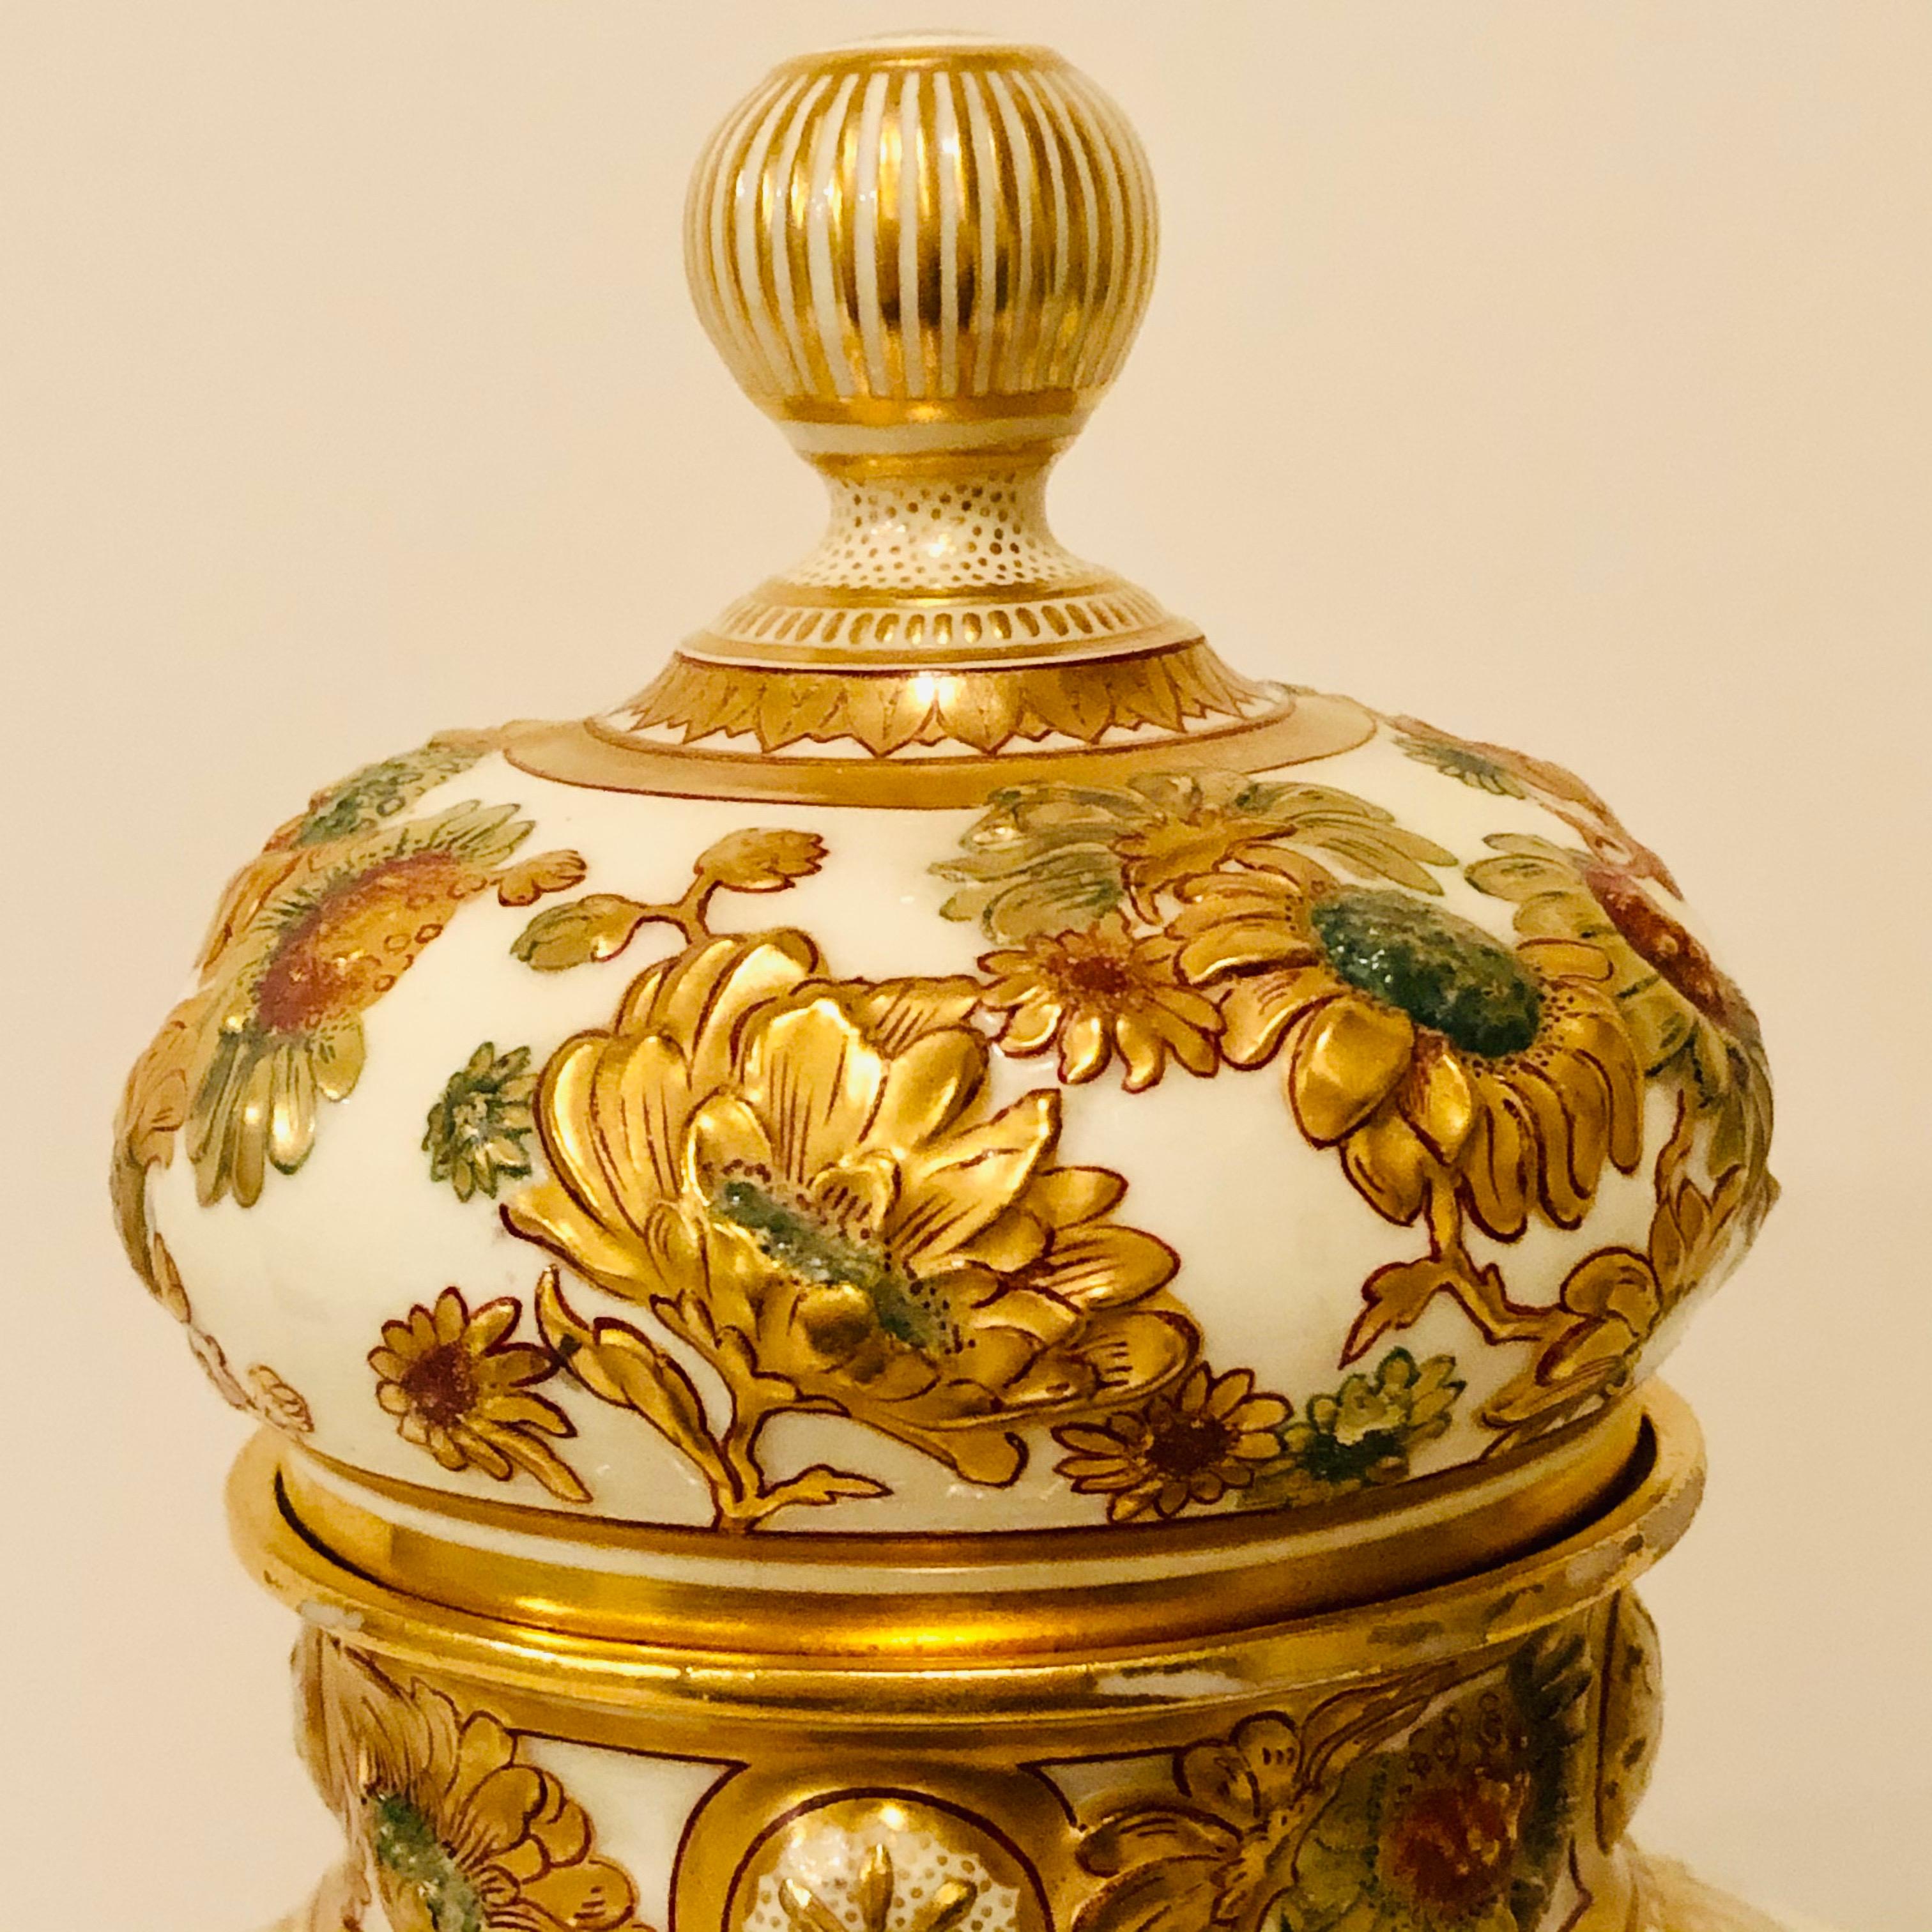 Late 19th Century Museum Quality Royal Crown Derby Urn with Raised Gold and Flower Decorations